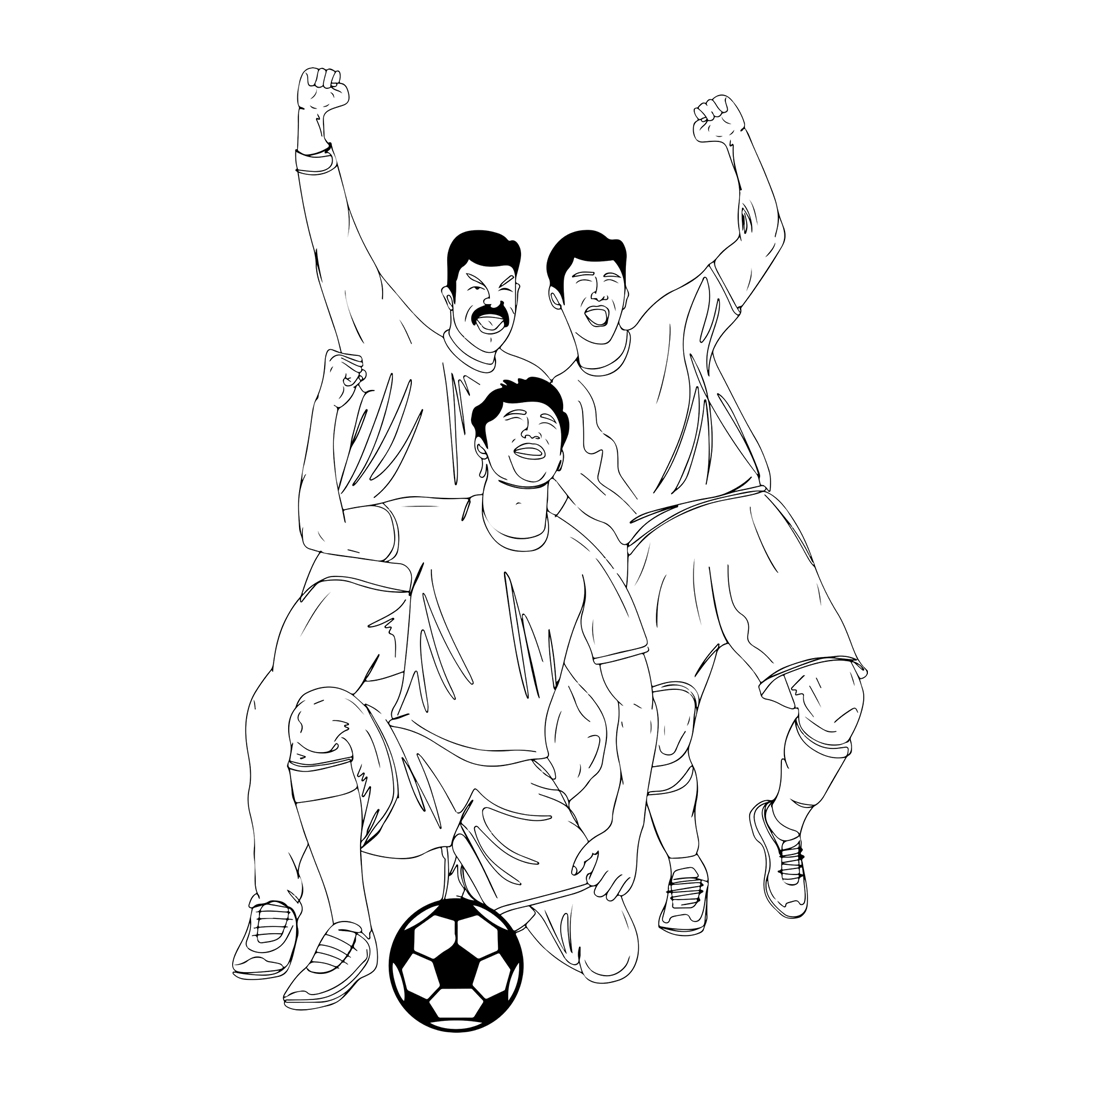 Cup-Winning Joy: Sketch Drawing of Football Team After Final Match, Winning Huddle: Rugby/American Football Team Celebrating Victory, Football Team Celebrating After Final Match preview image.